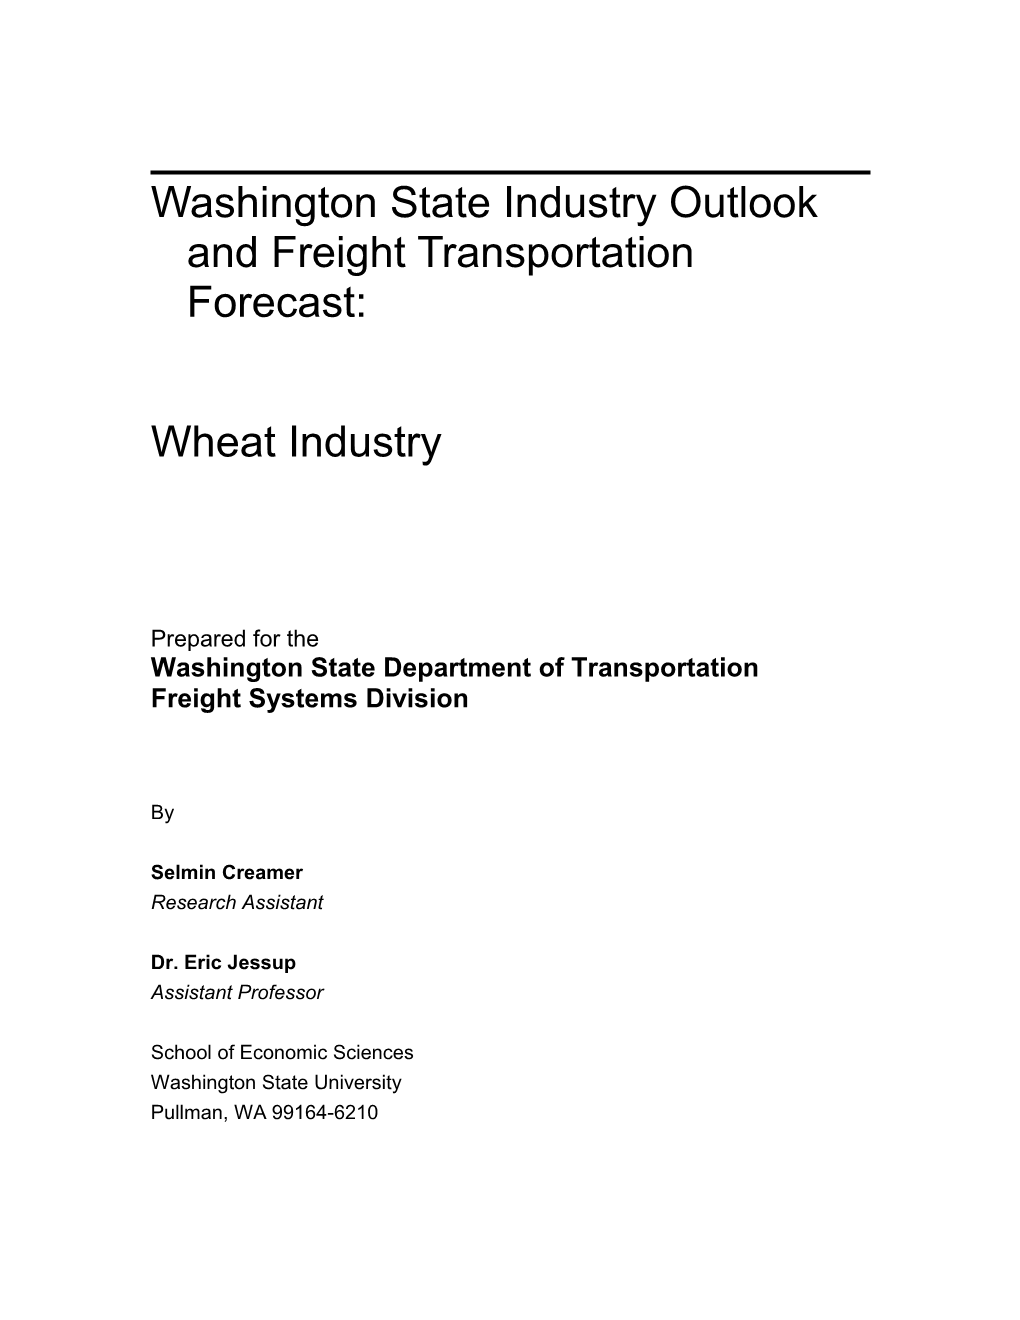 Washington State Industry Outlook and Freight Transportation Forecast